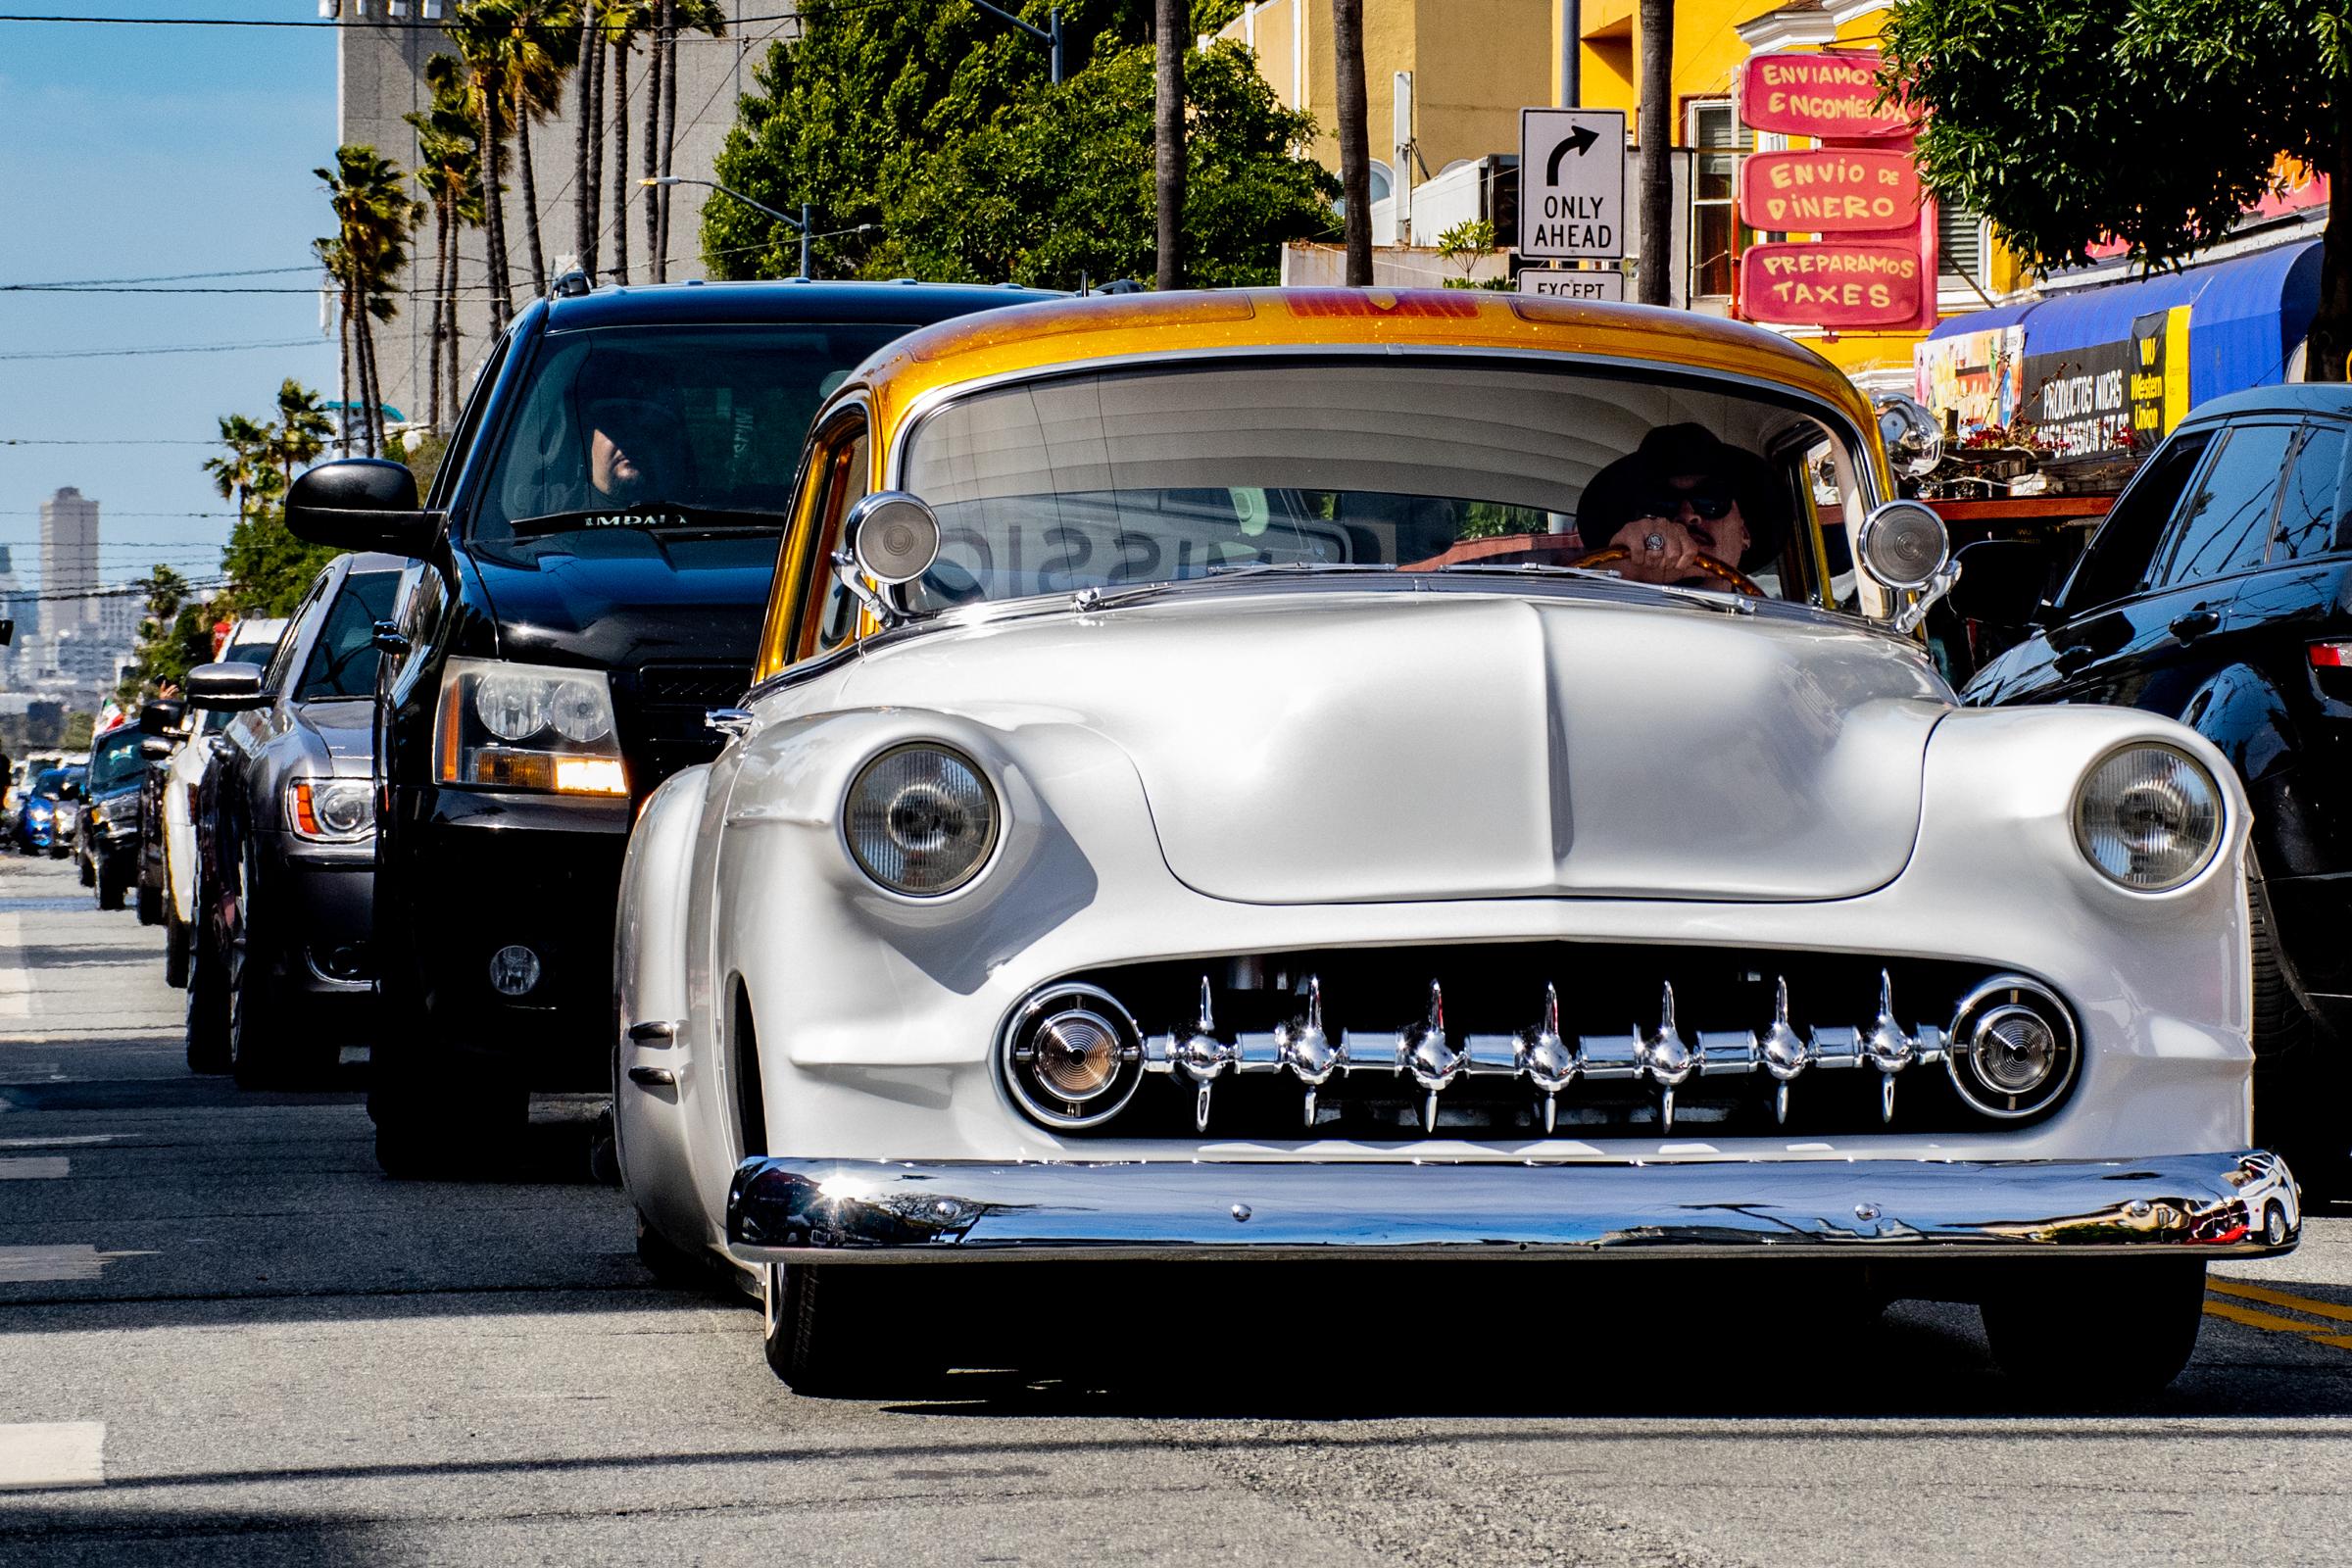 Lowriders Cinco de Mayo Show -  Lowriders stroll down Mission street during the annual...